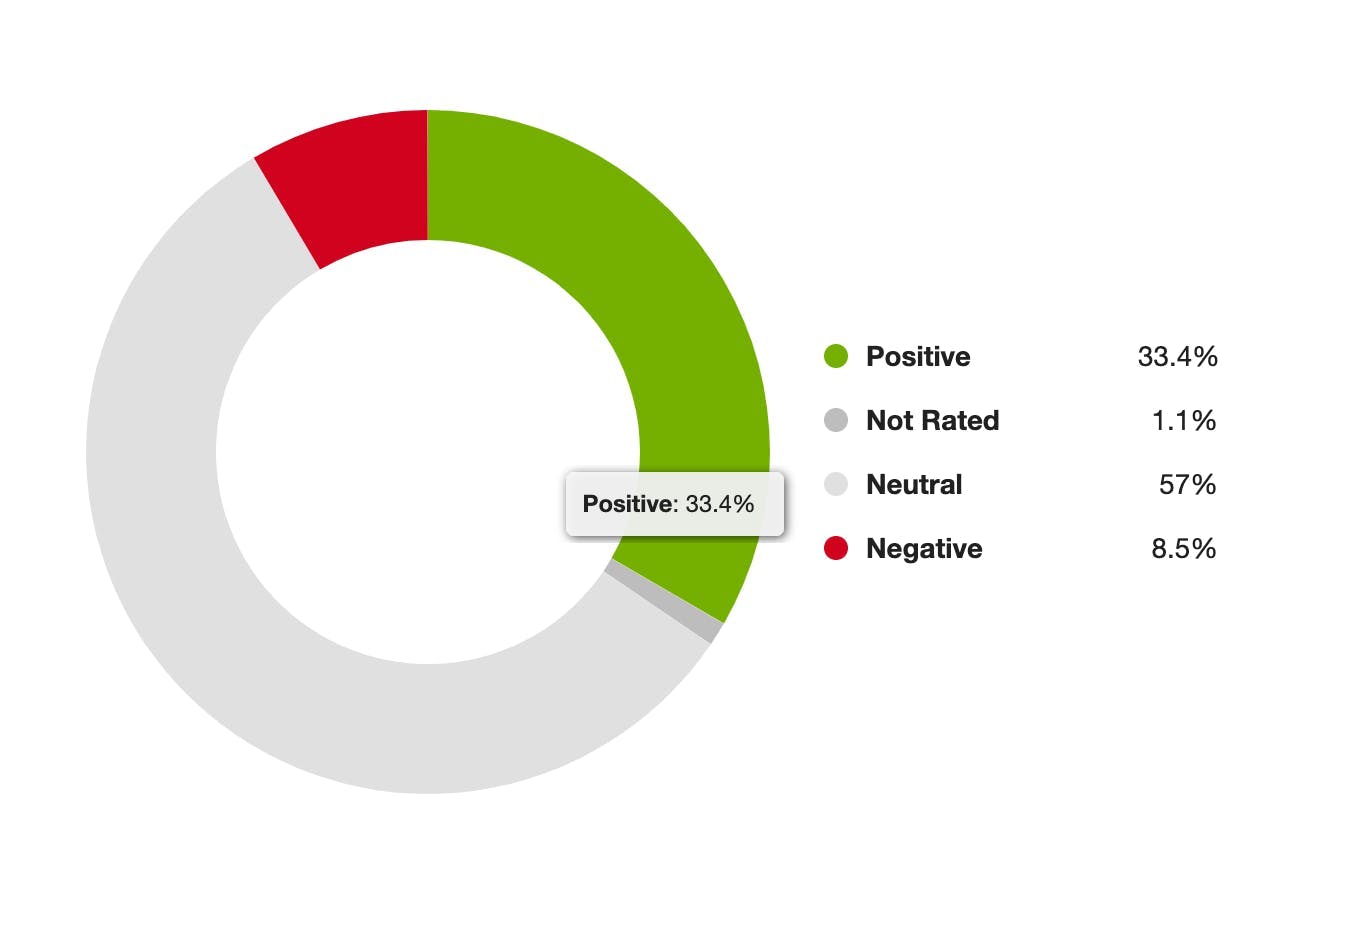 A ring graph showing the sentiment of mentions of Miley Cyrus from March 27 to April 2 with 33.4% positive sentiment.